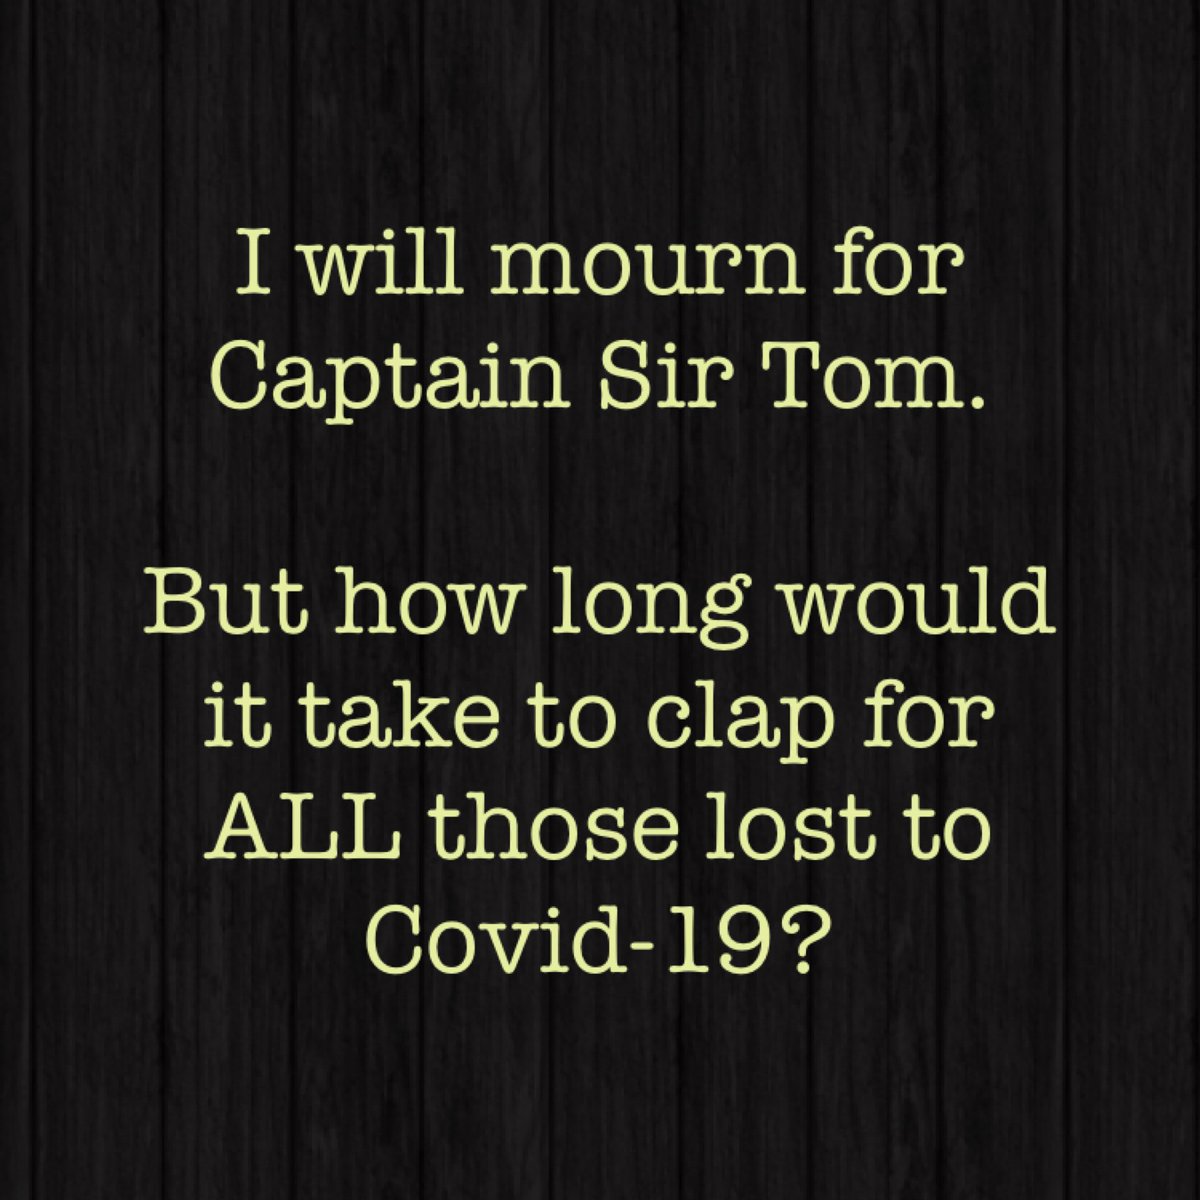 Sir Tom will always be a national treasure. I’m disgusted to see #CaptainTom’s memory and achievements being used by the government who defunded the #NHS & mismanaged #COVID19 to the extent Sir Tom felt obliged to help raise money.
#CashNotClaps #RefundTheNHS #ClapForCaptainTom